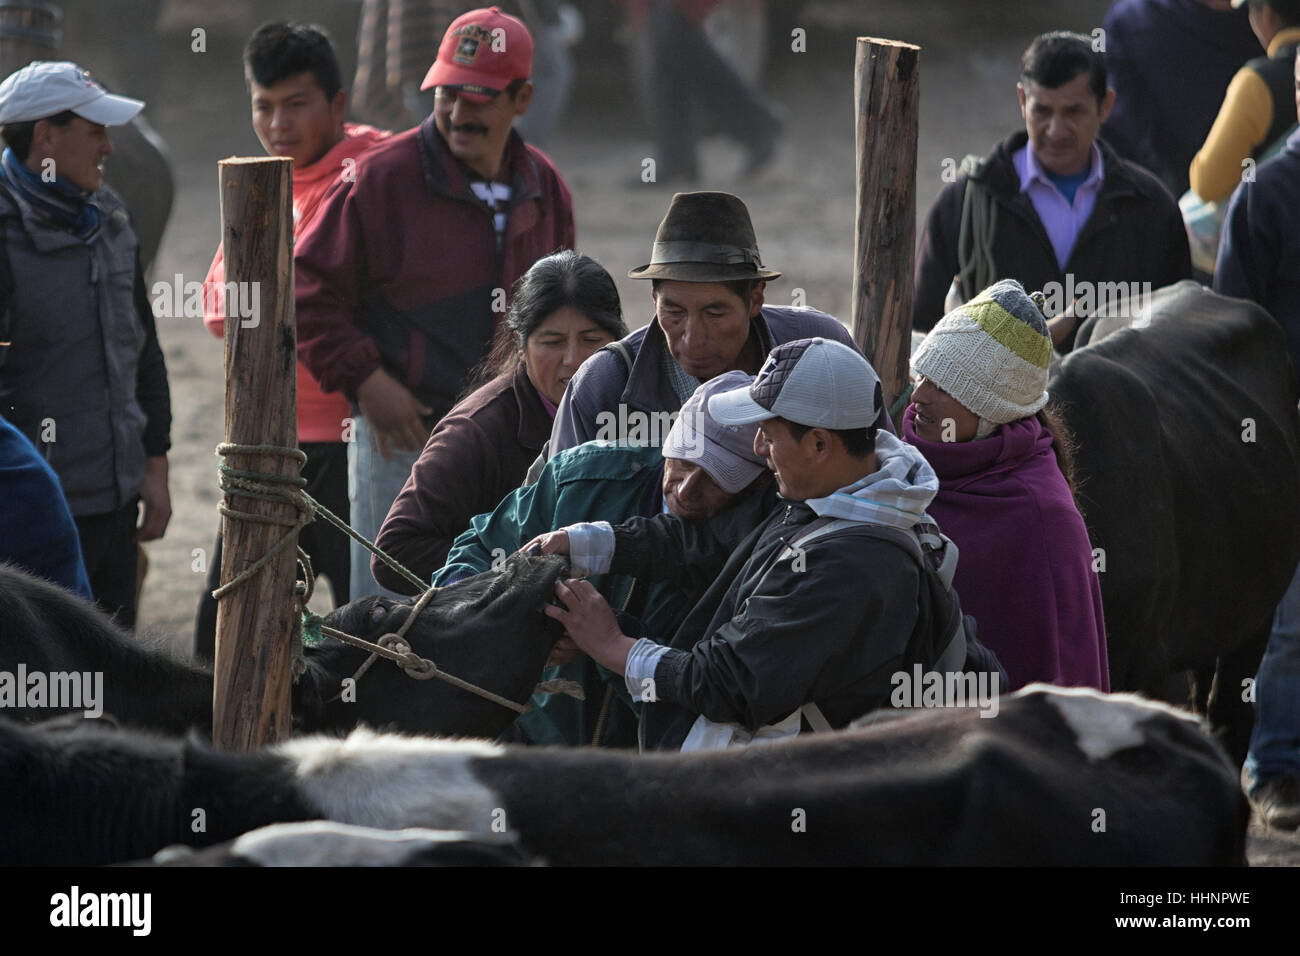 August 6, 2016 Otavalo, Ecuador: Men and women trading or selling their livestock in the animal market, teeth checkup of a cow Stock Photo